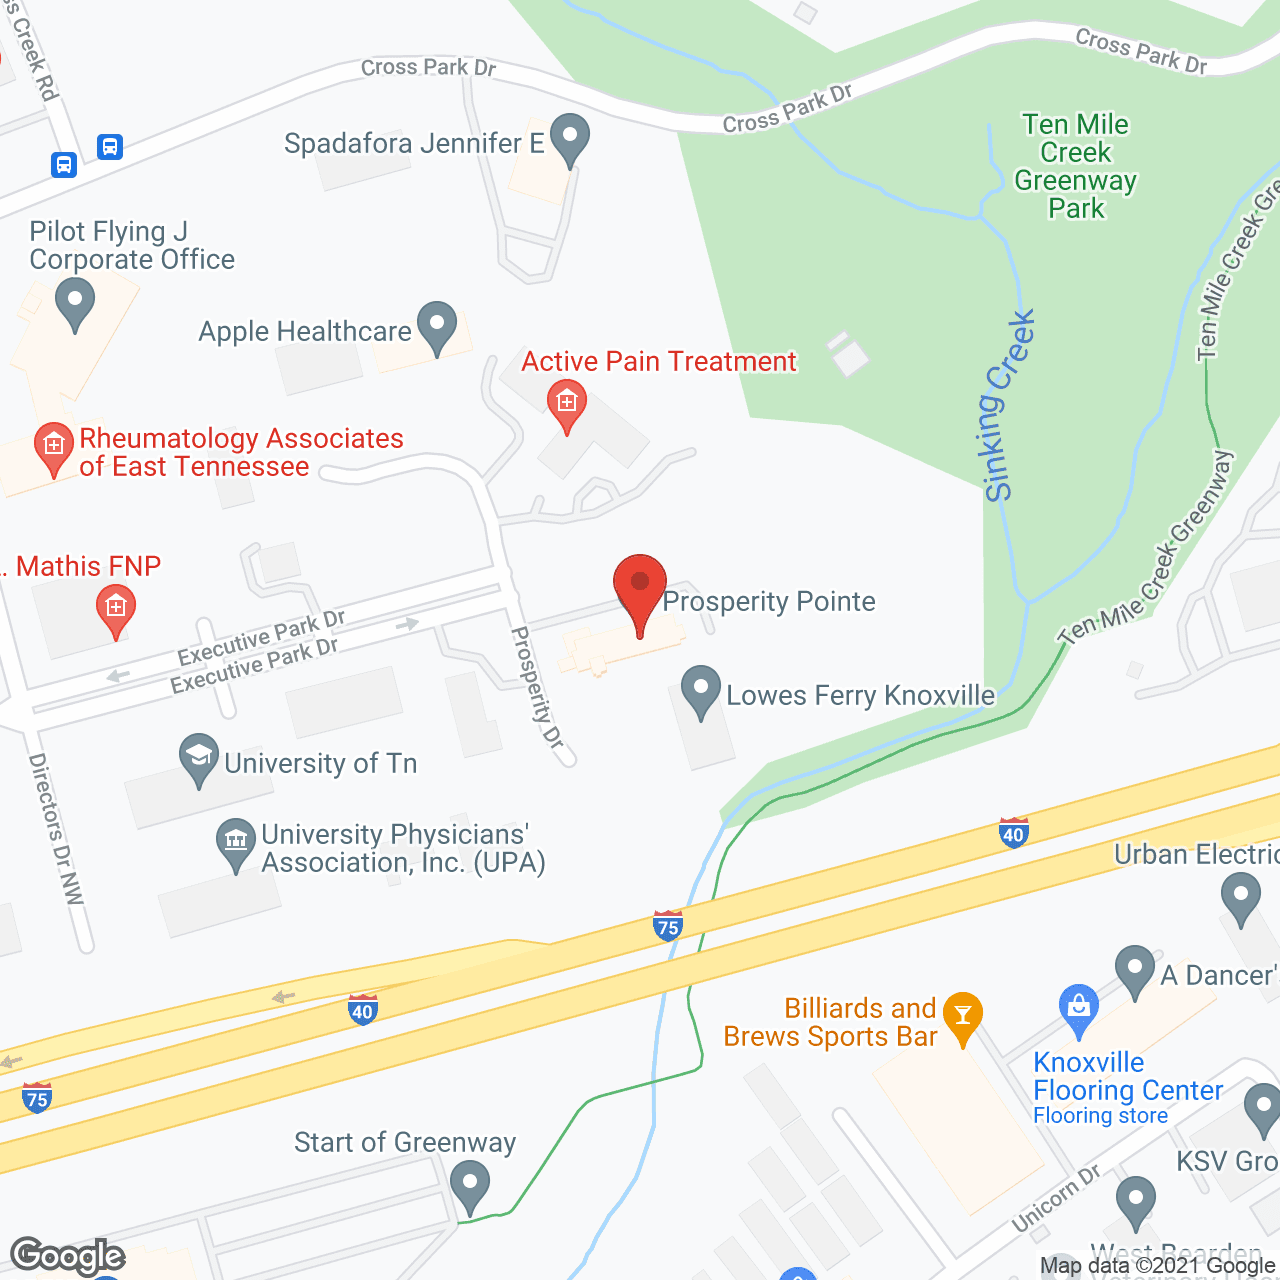 Prosperity Pointe Assisted Living & Memory Care in google map